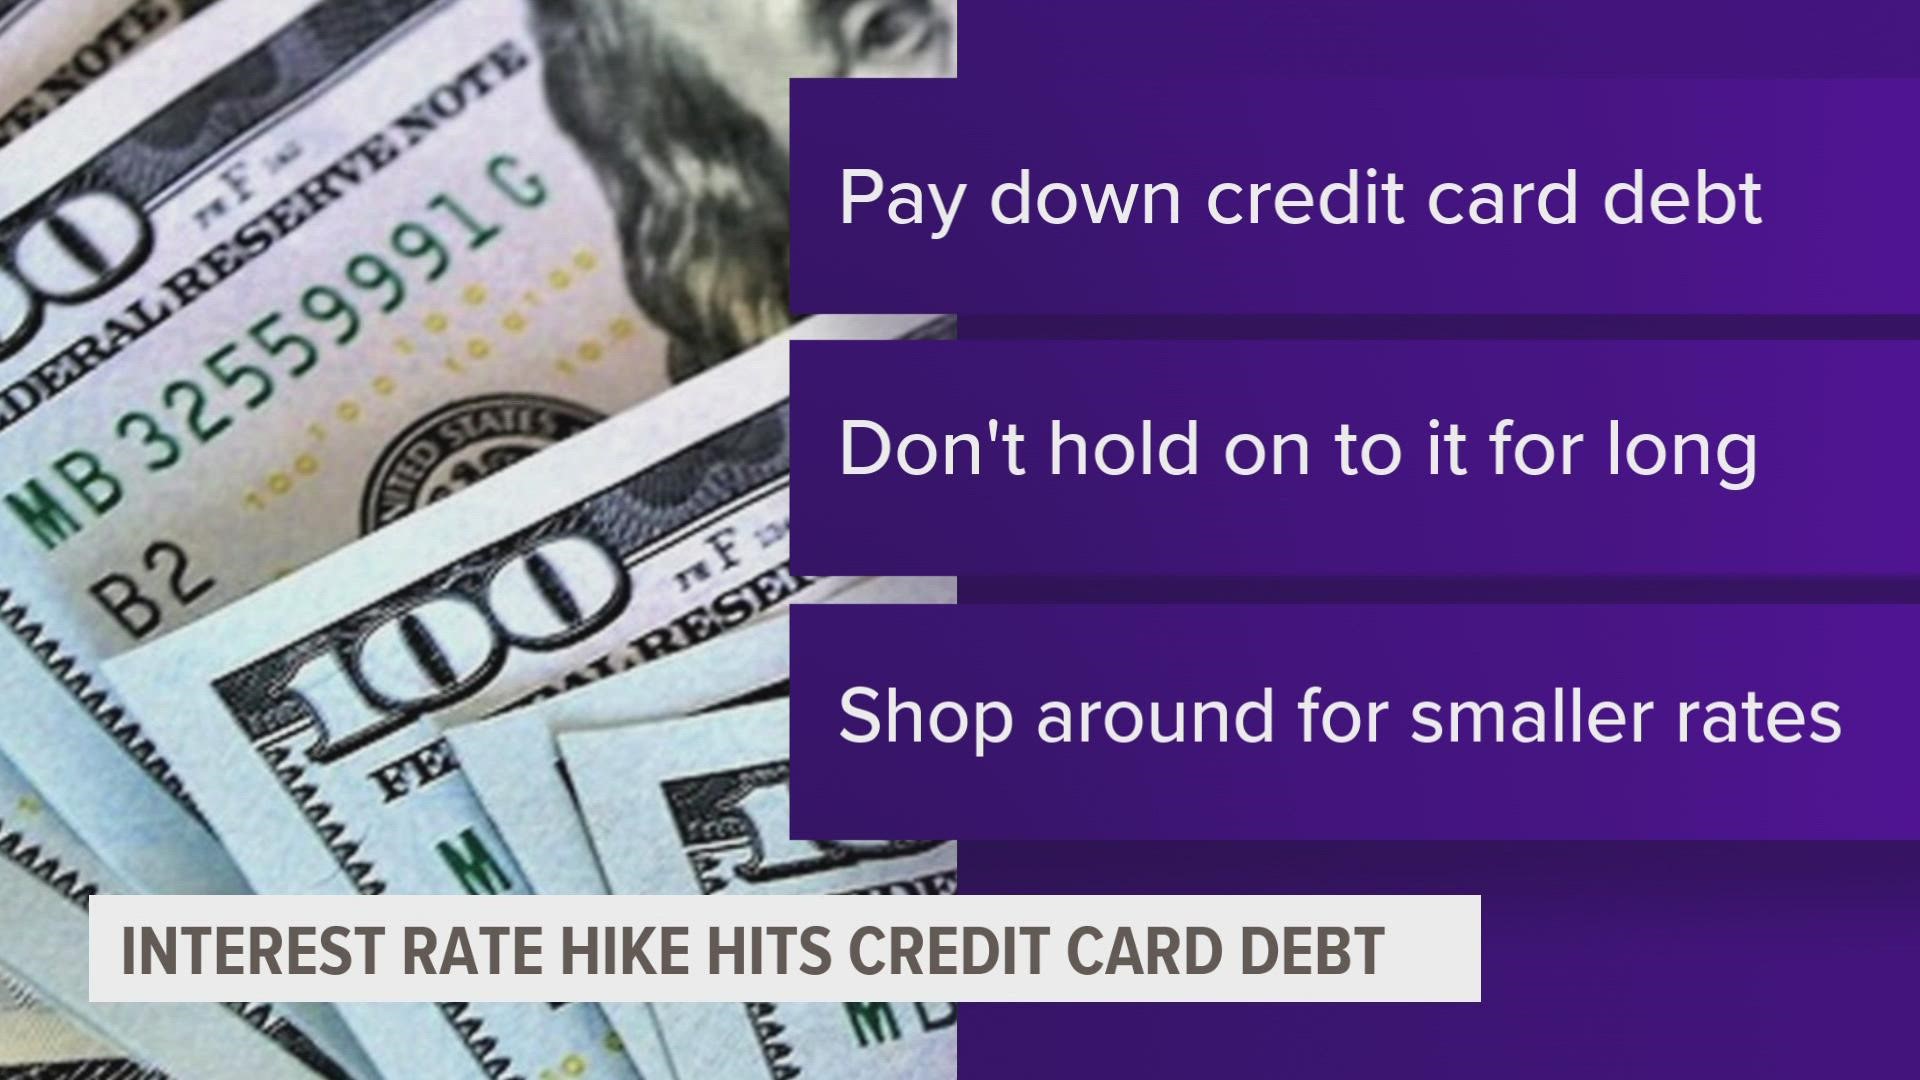 Financial advisor Mike Hammen spoke with Local 5 on how to manage credit card debt as interest rates increase.